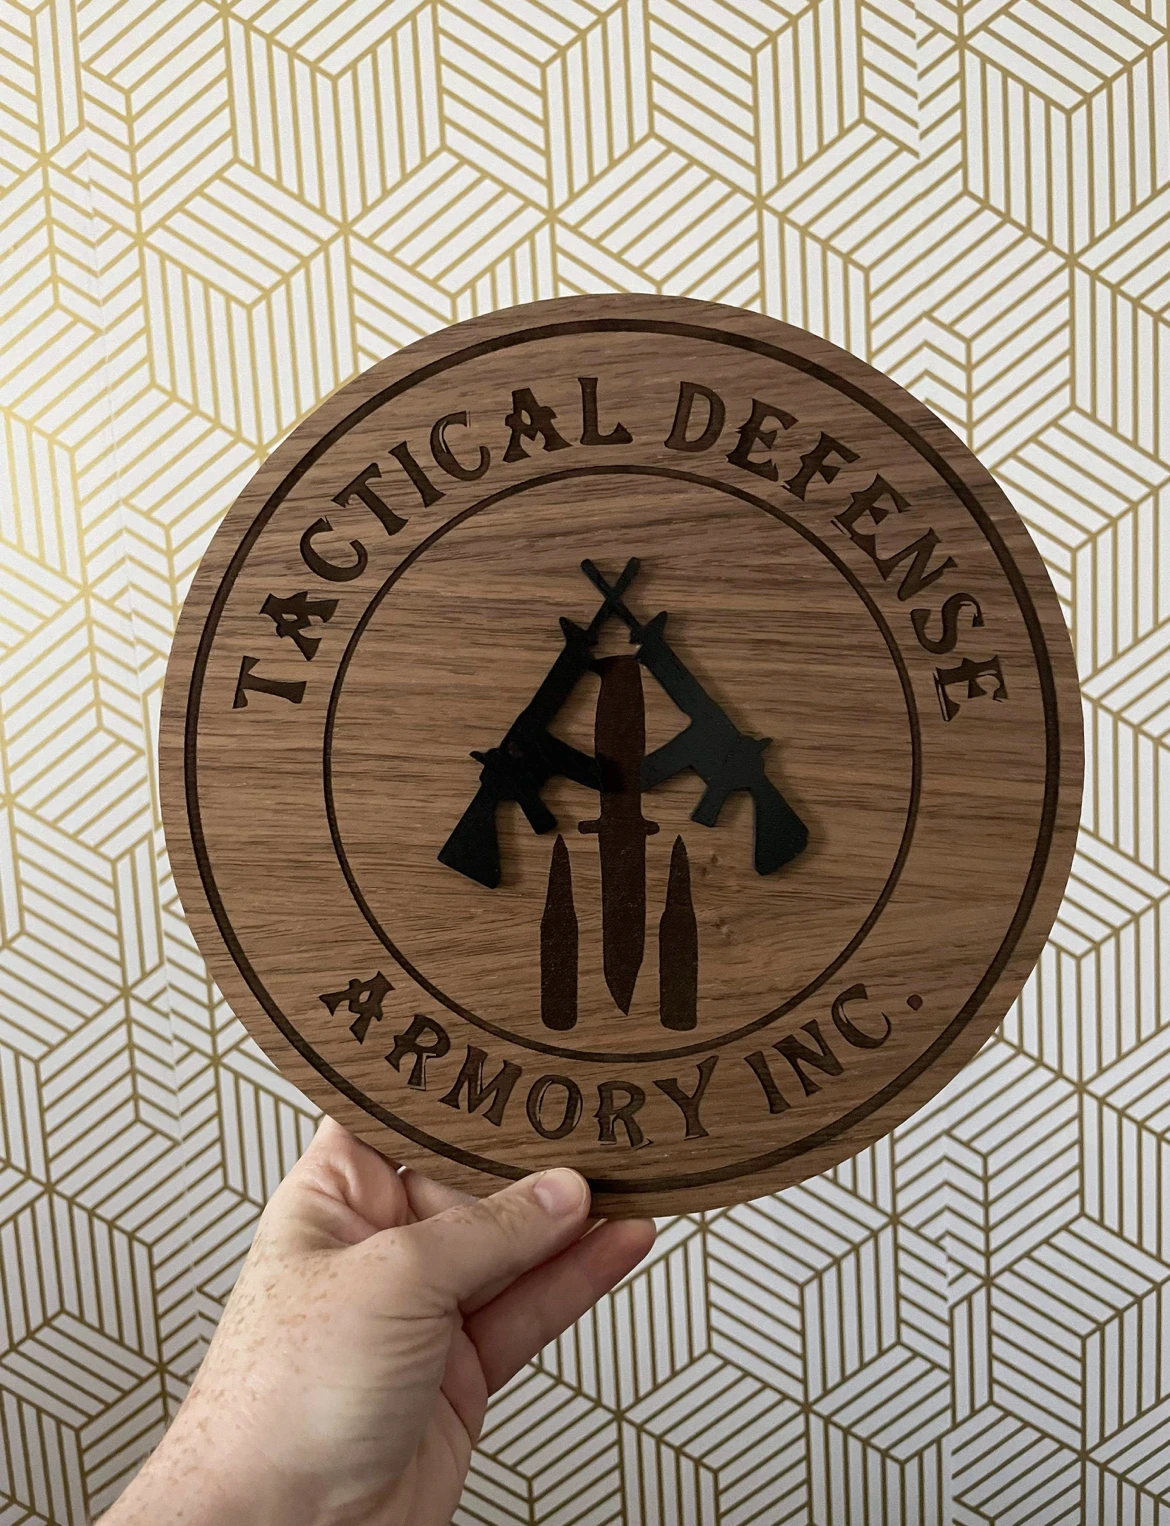 Engraved Wood & Layered Signage for Tactical Defense Armory Inc.